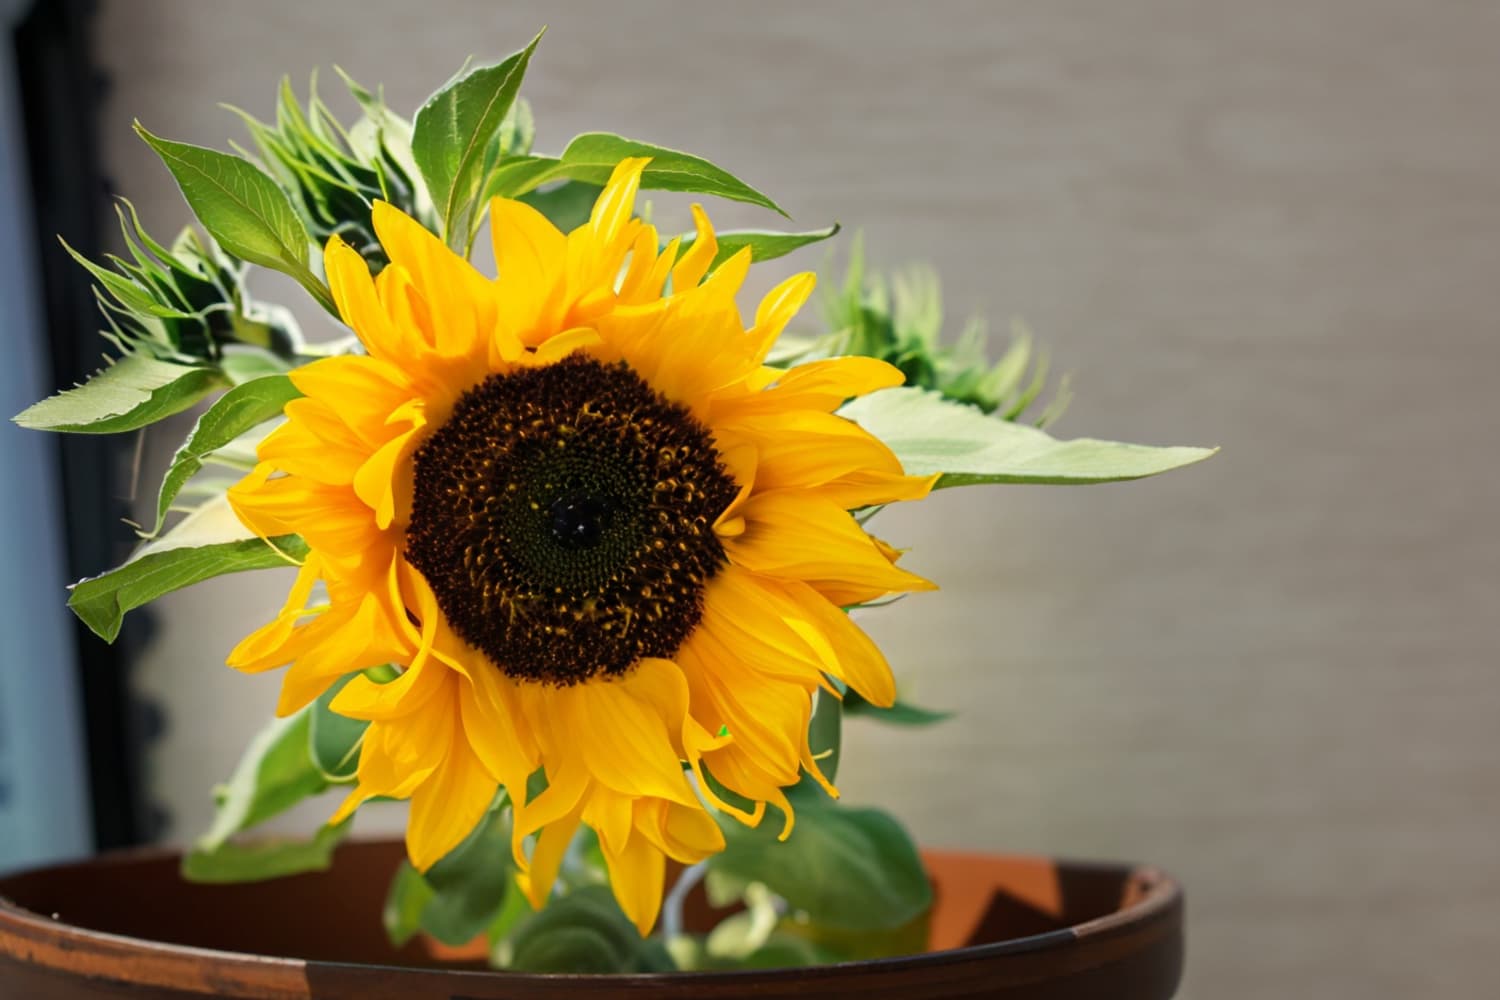 https://cdn.apartmenttherapy.info/image/upload/f_auto,q_auto:eco,c_fill,g_auto,w_1500,ar_3:2/at%2Fhome-projects%2F2023-08%2Fgrowing-sunflowers-in-pots%2Fclose-up-potted-sunflower-shutterstock_2322131063